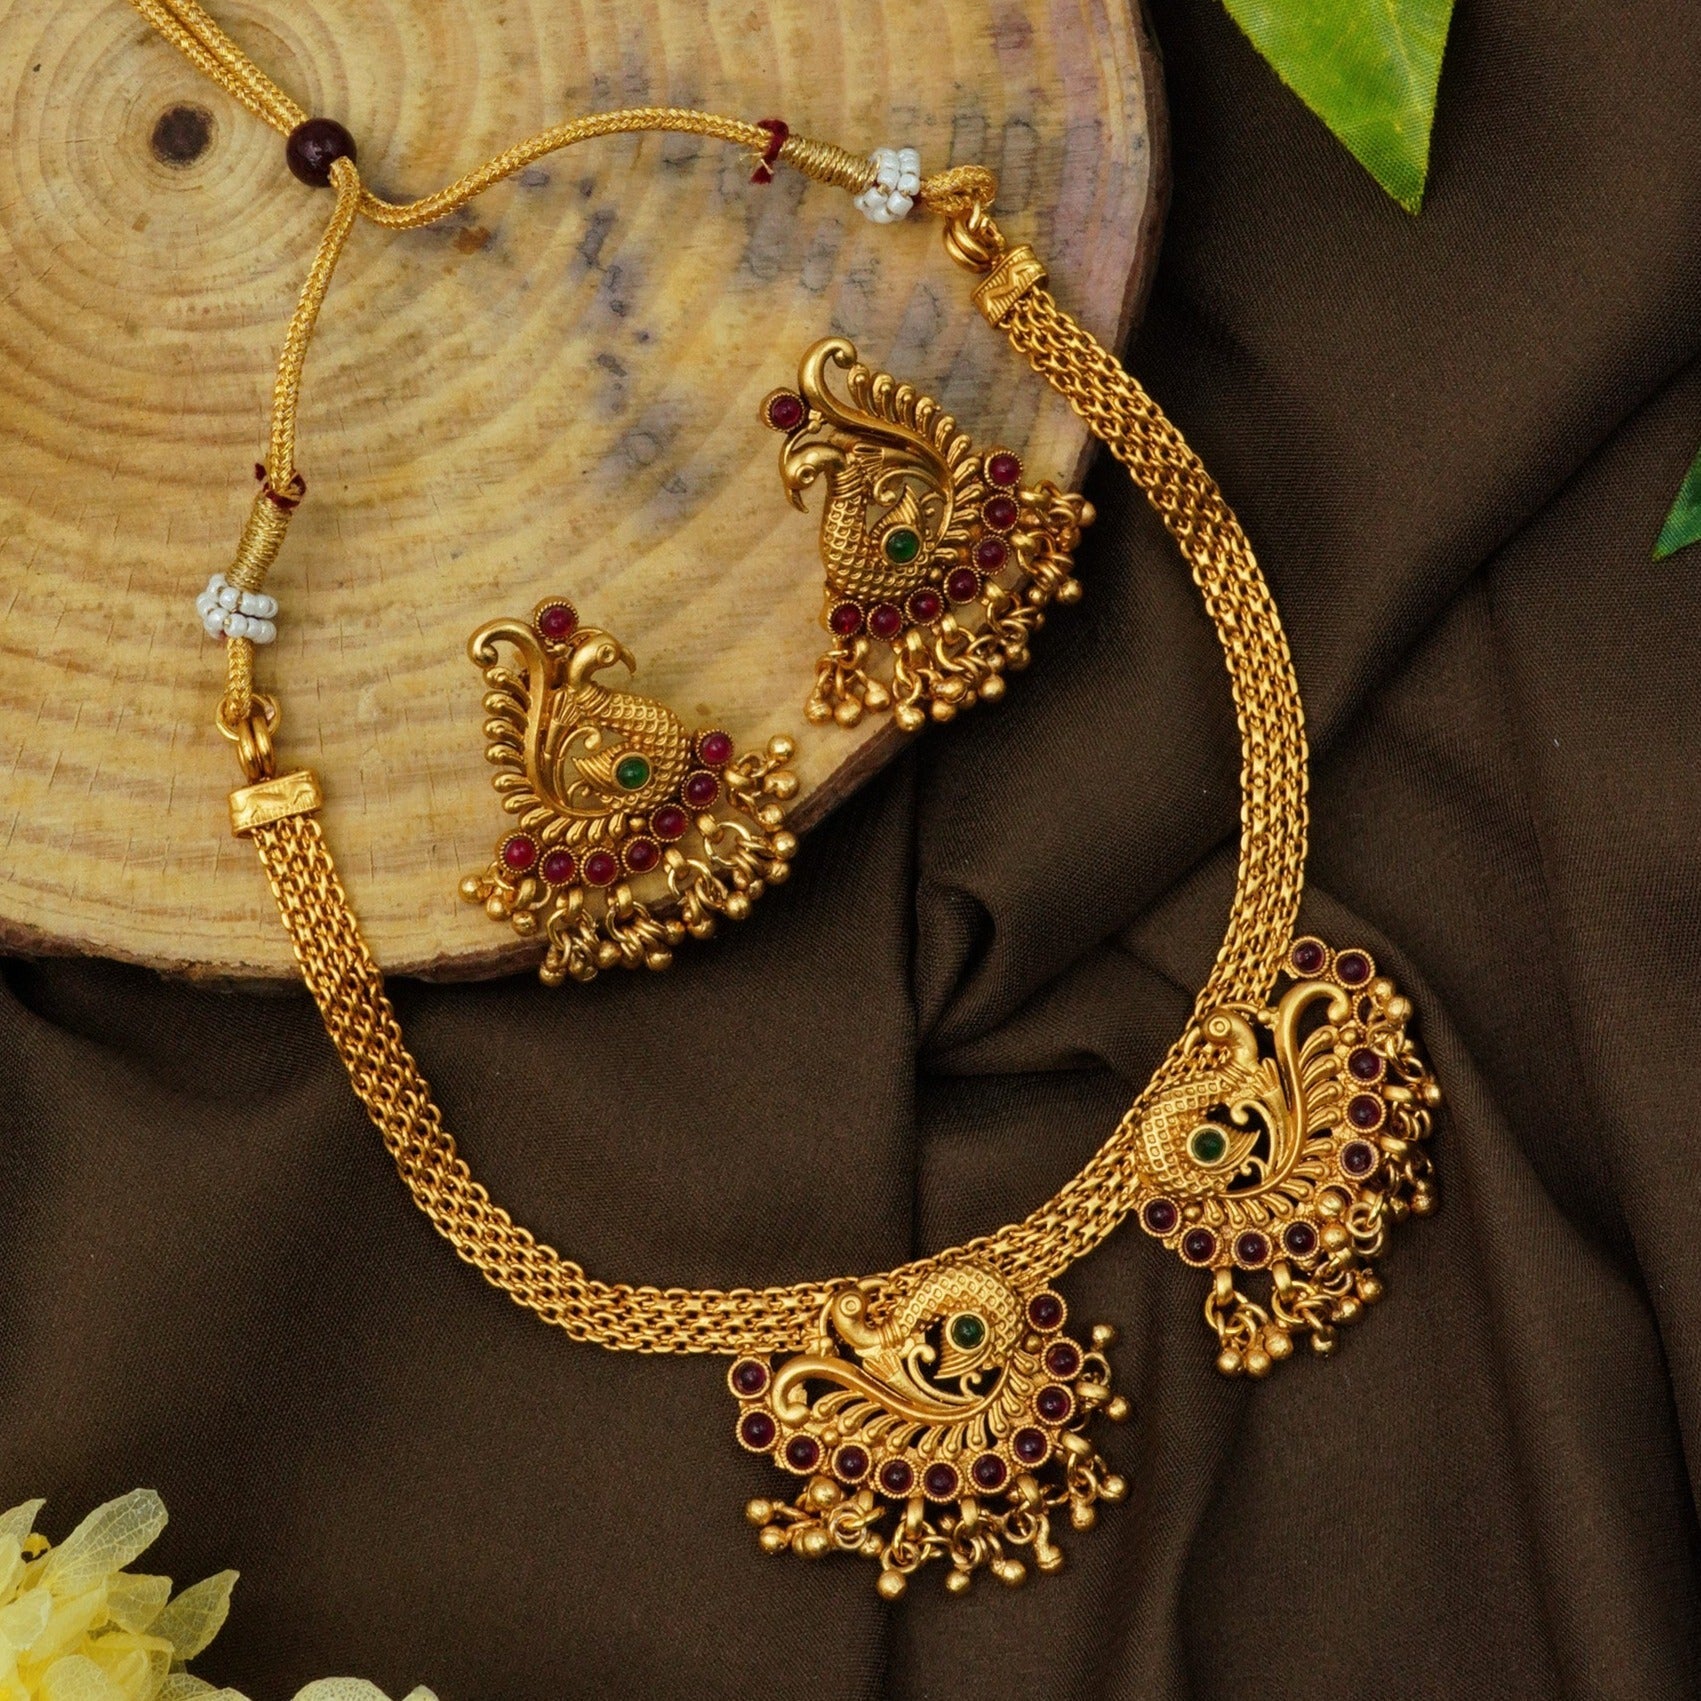 Gold Plated colored stone Necklace set 9530N